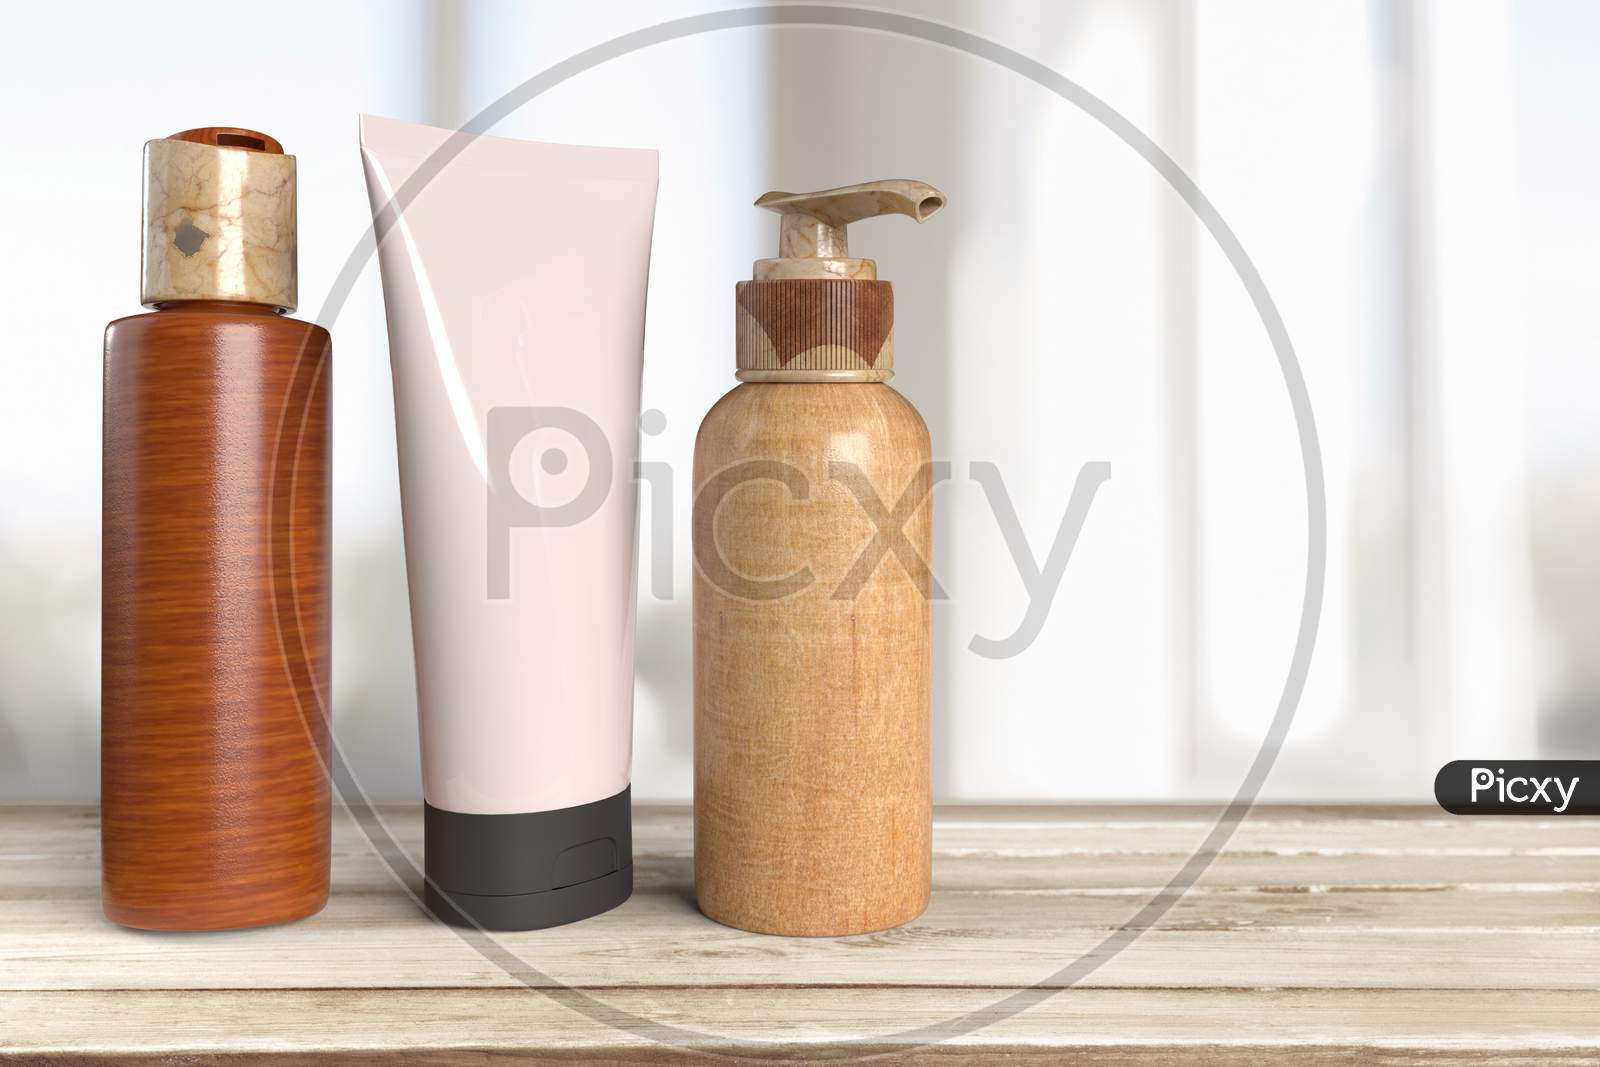 Cosmetic Set A Pump Lid Bottle, A Flip Lid Bottle And A Squeeze Tube With Blank Mockups Isolated At Wooden Table Top In Blur Interior Background, Hygienic Lifestyle Concept. 3D Rendering